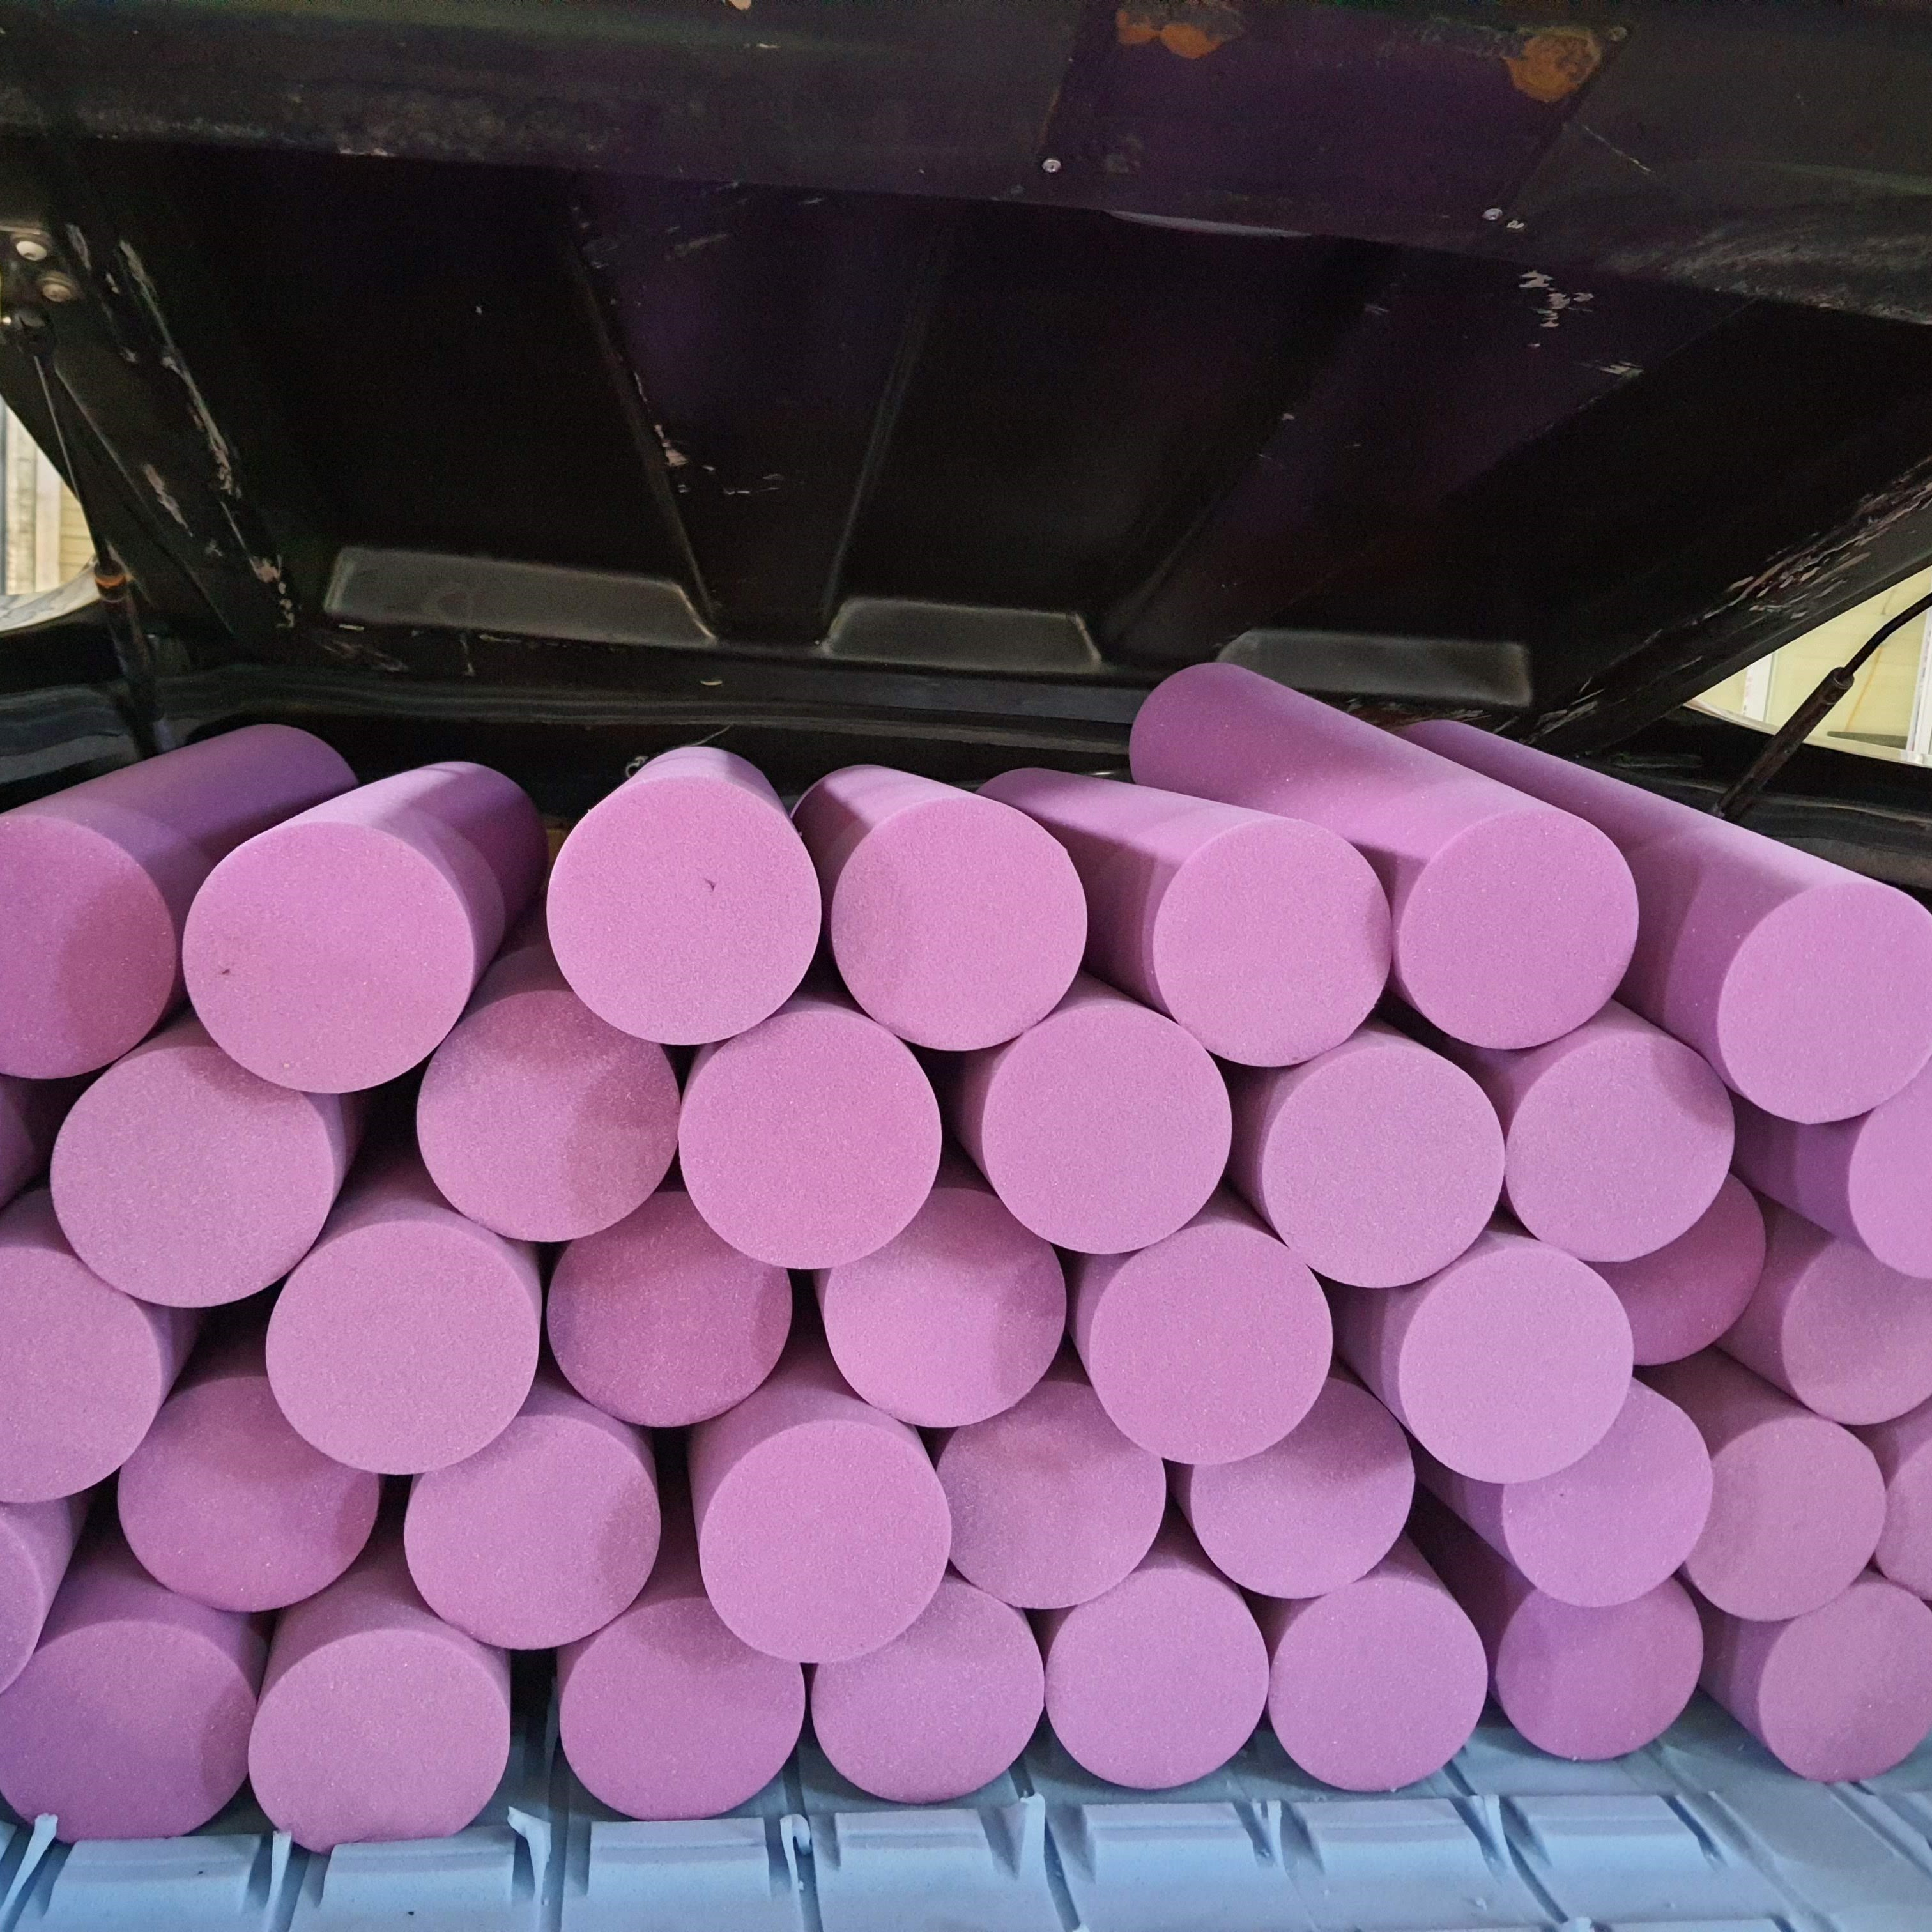 Polyurethane Foam Barrel Good price High Precision Soft Products Material Bags/Boxes Industry Pallets from Vietnam Manufacturer 6